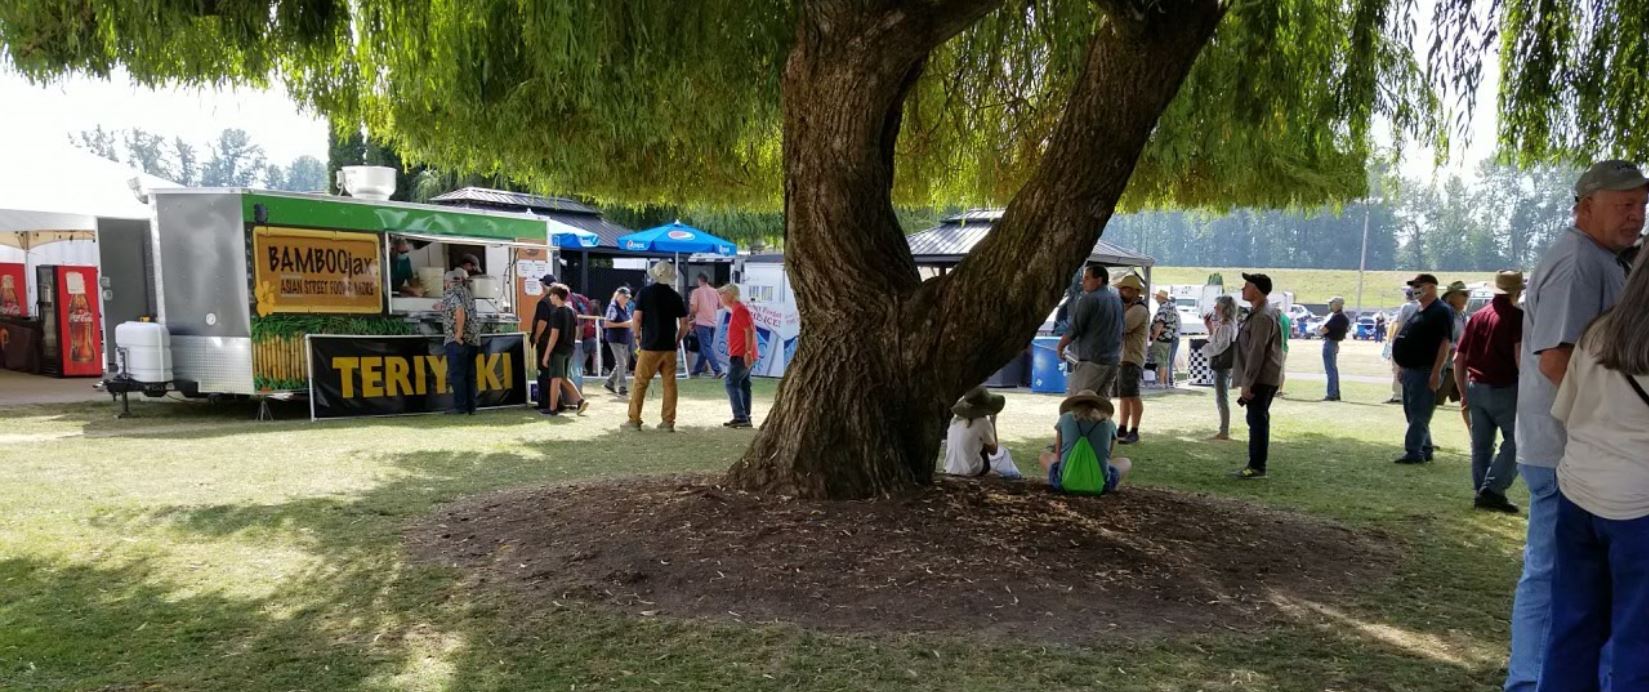 A variety of food vendors were available.